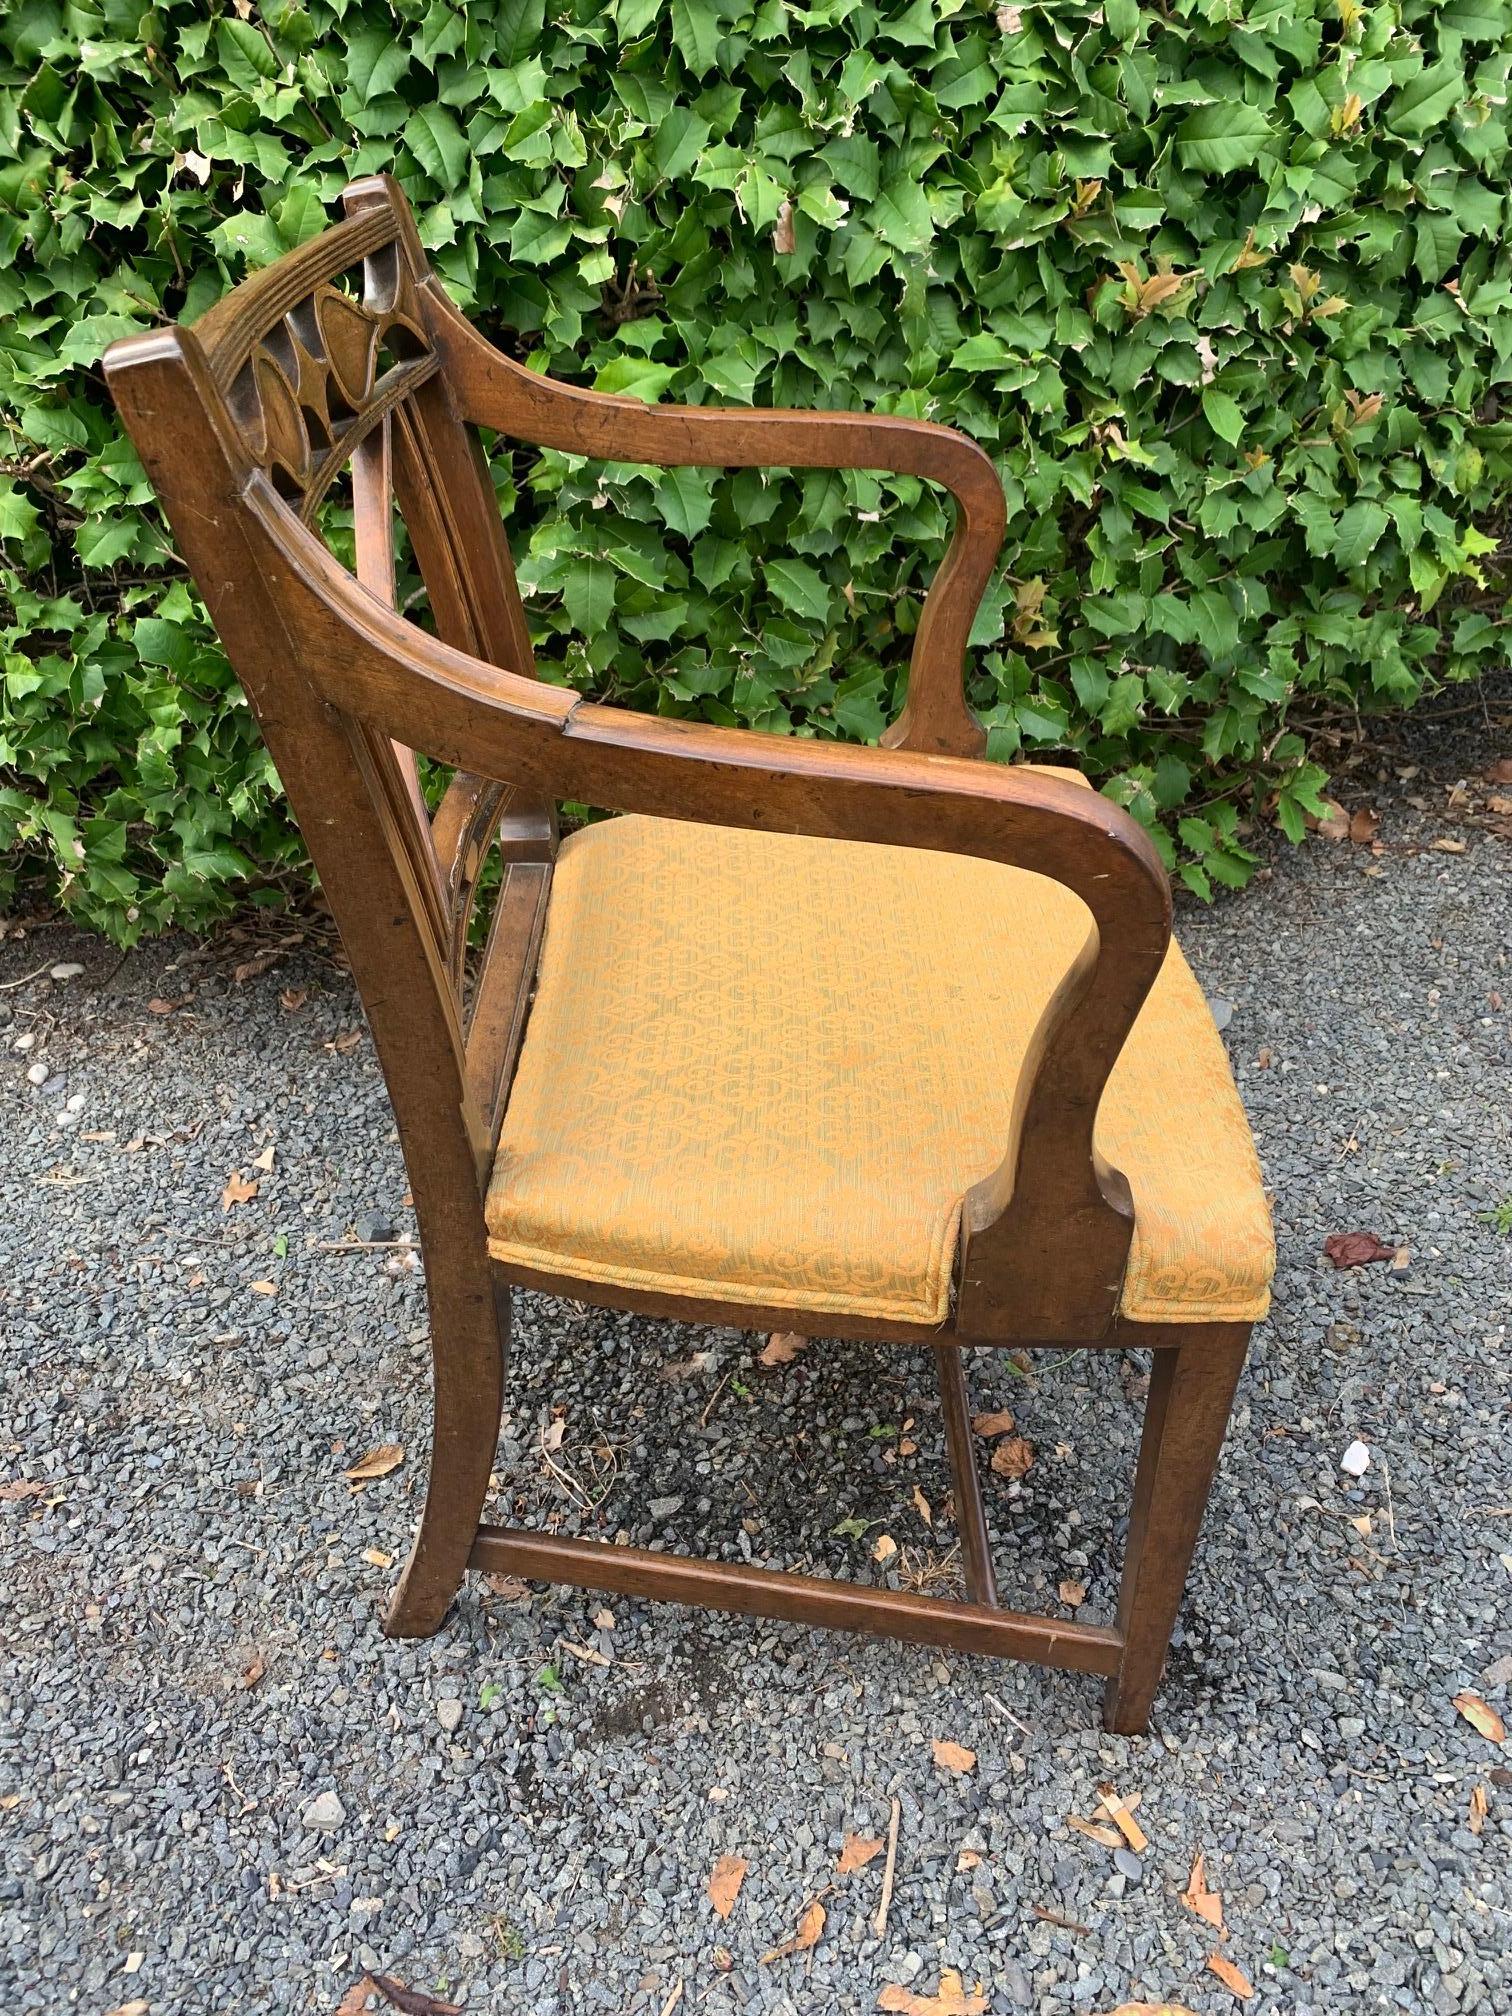 Set of 6 handsome Regency style walnut dining chairs including two with arms and 4 side chairs.

Measures: Arm height 28

Seat 21” W Seat height and depth 17.5
Arm 28” H
Chair 33” H x 21” x W 21” D.